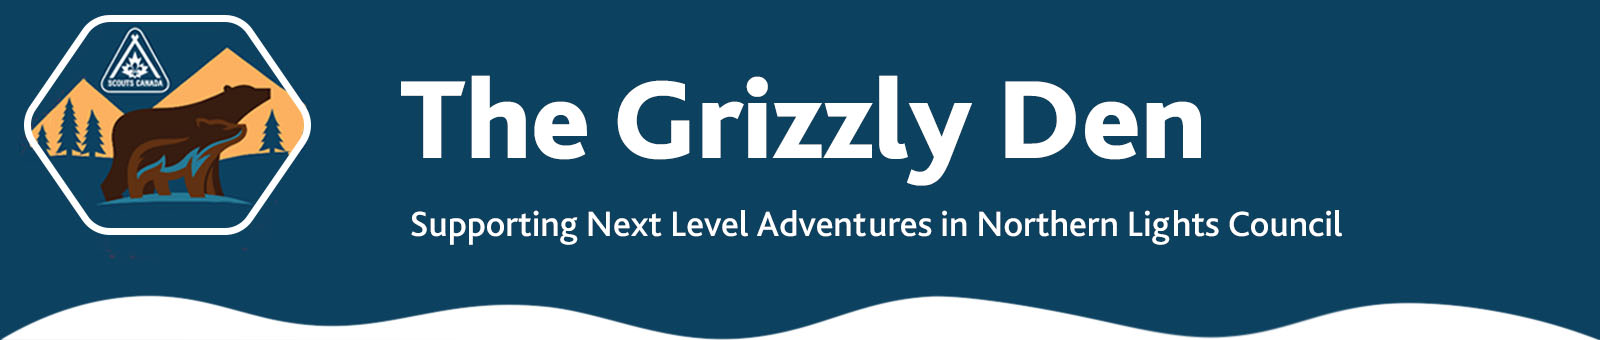 The Grizzly Den Competition